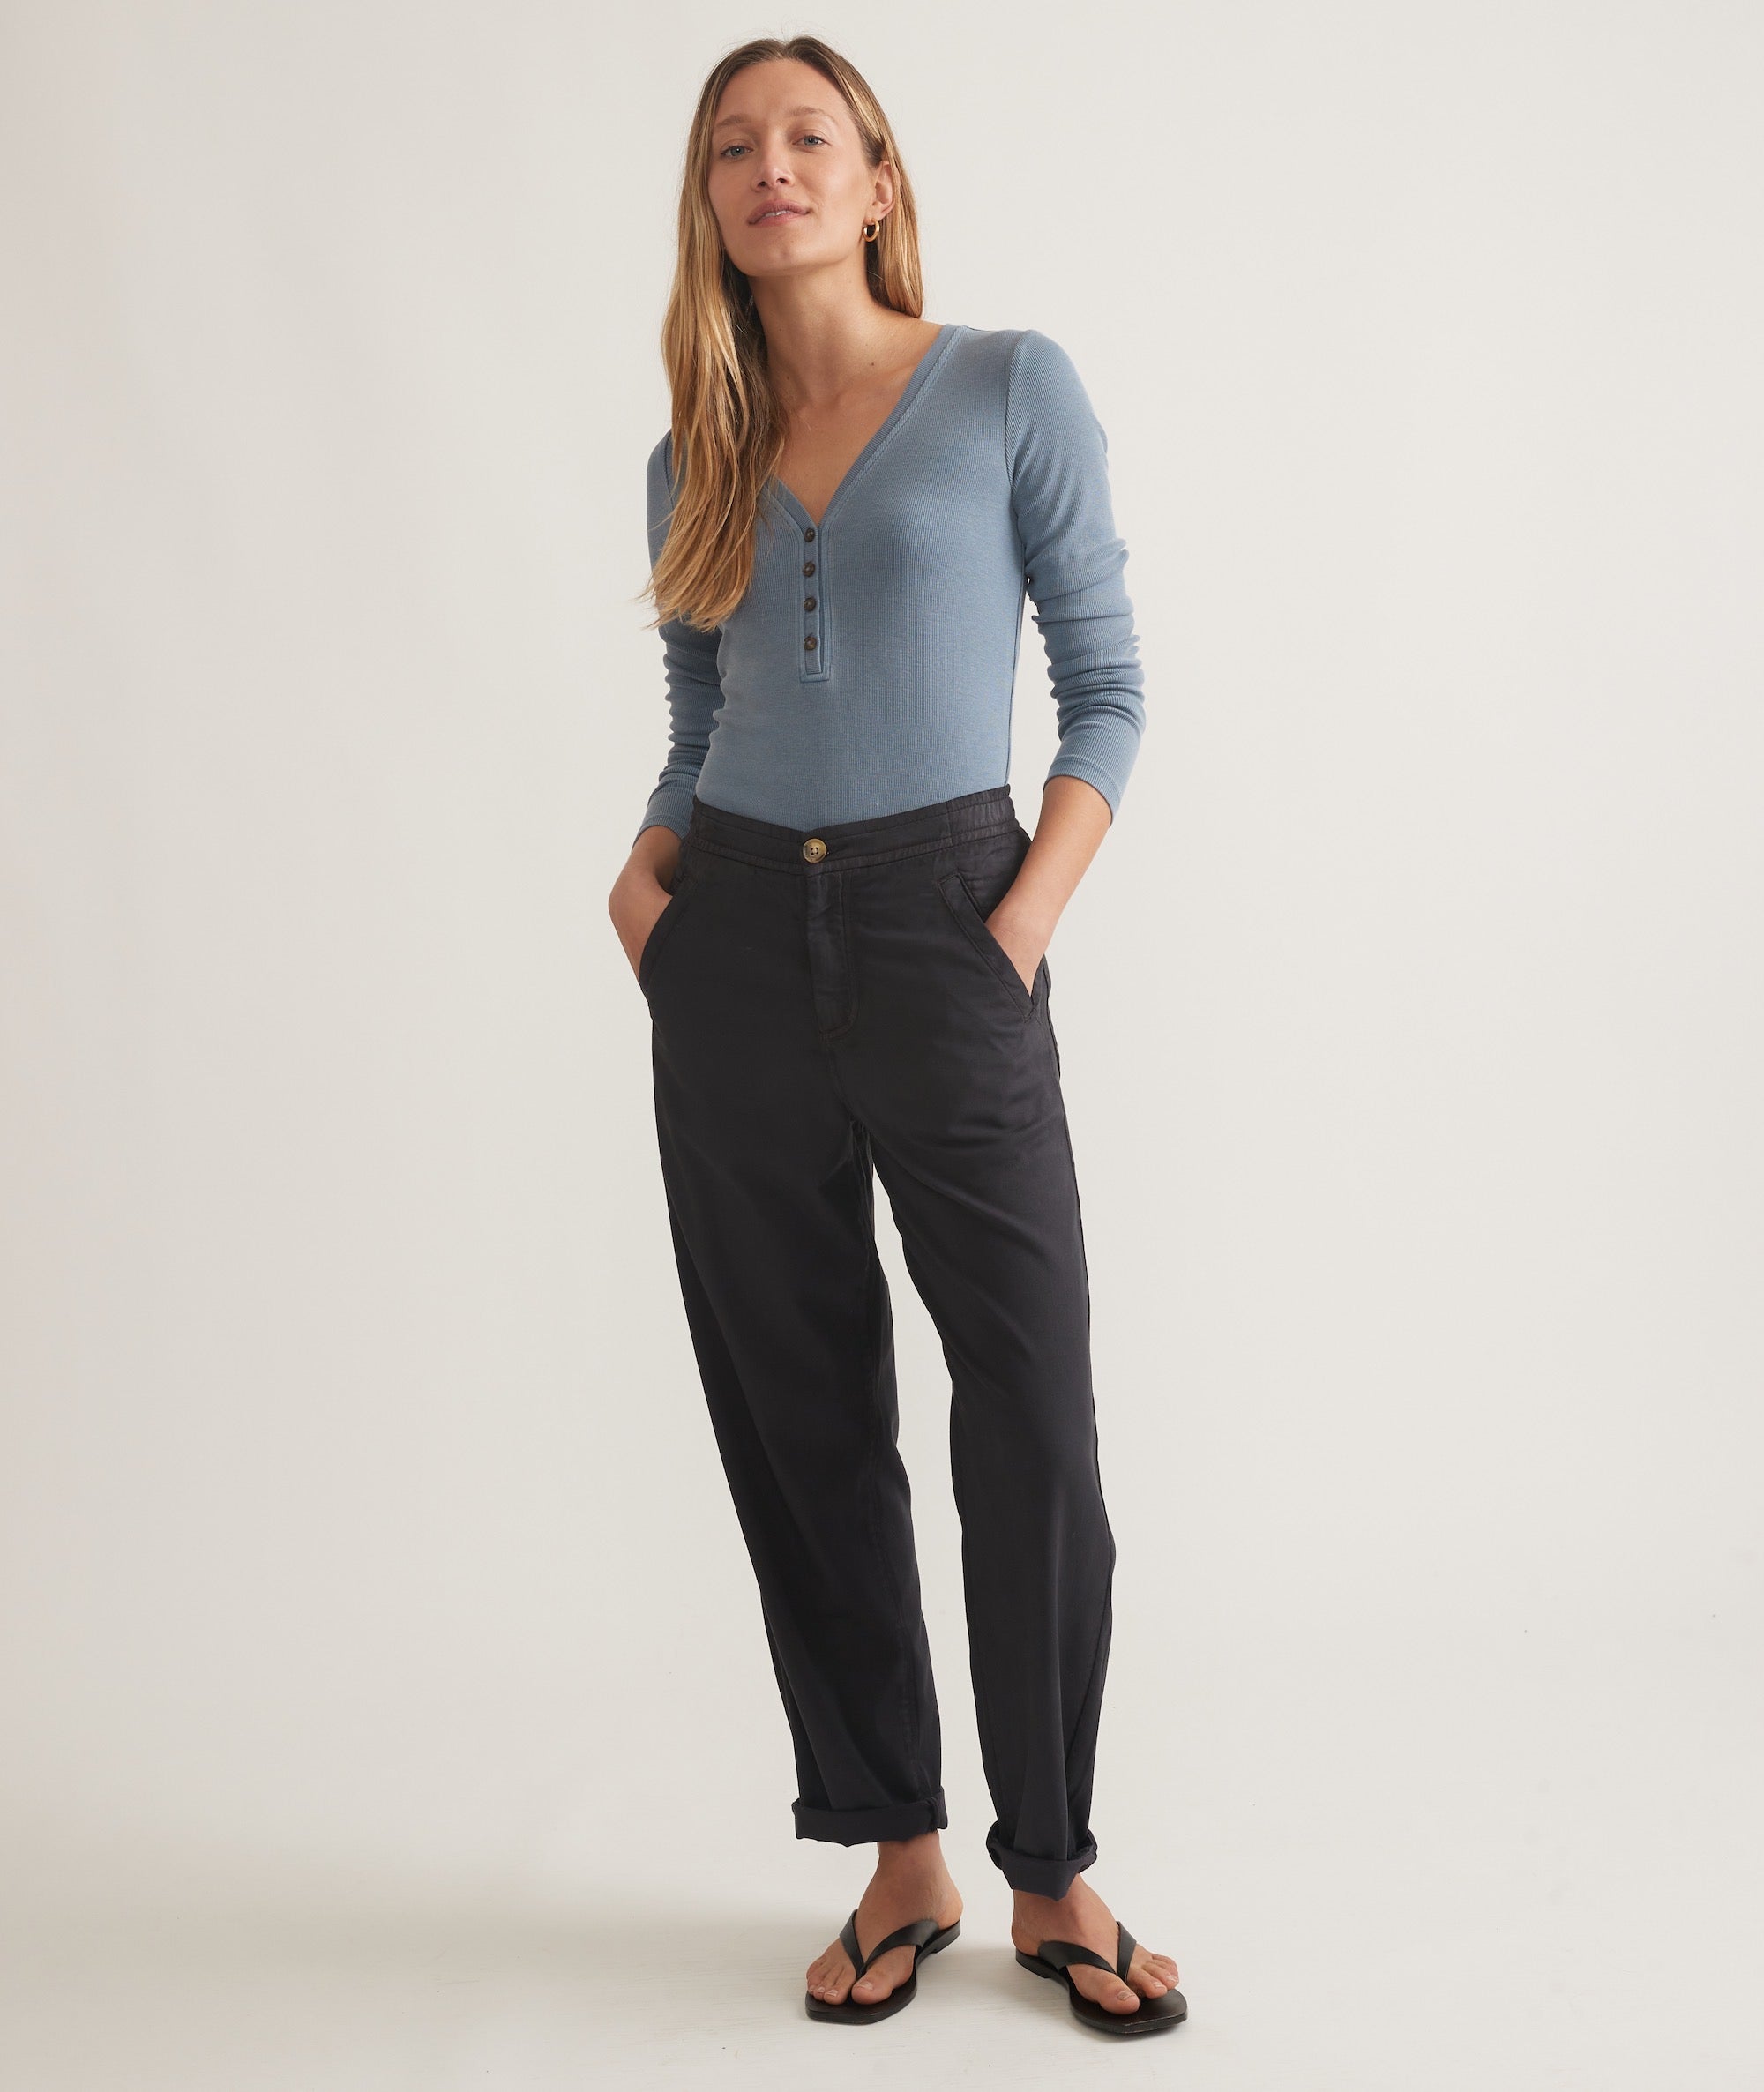 THE UPSIDE WOMENS ALTITUDE KENDALL PANT – StellarStyleATL